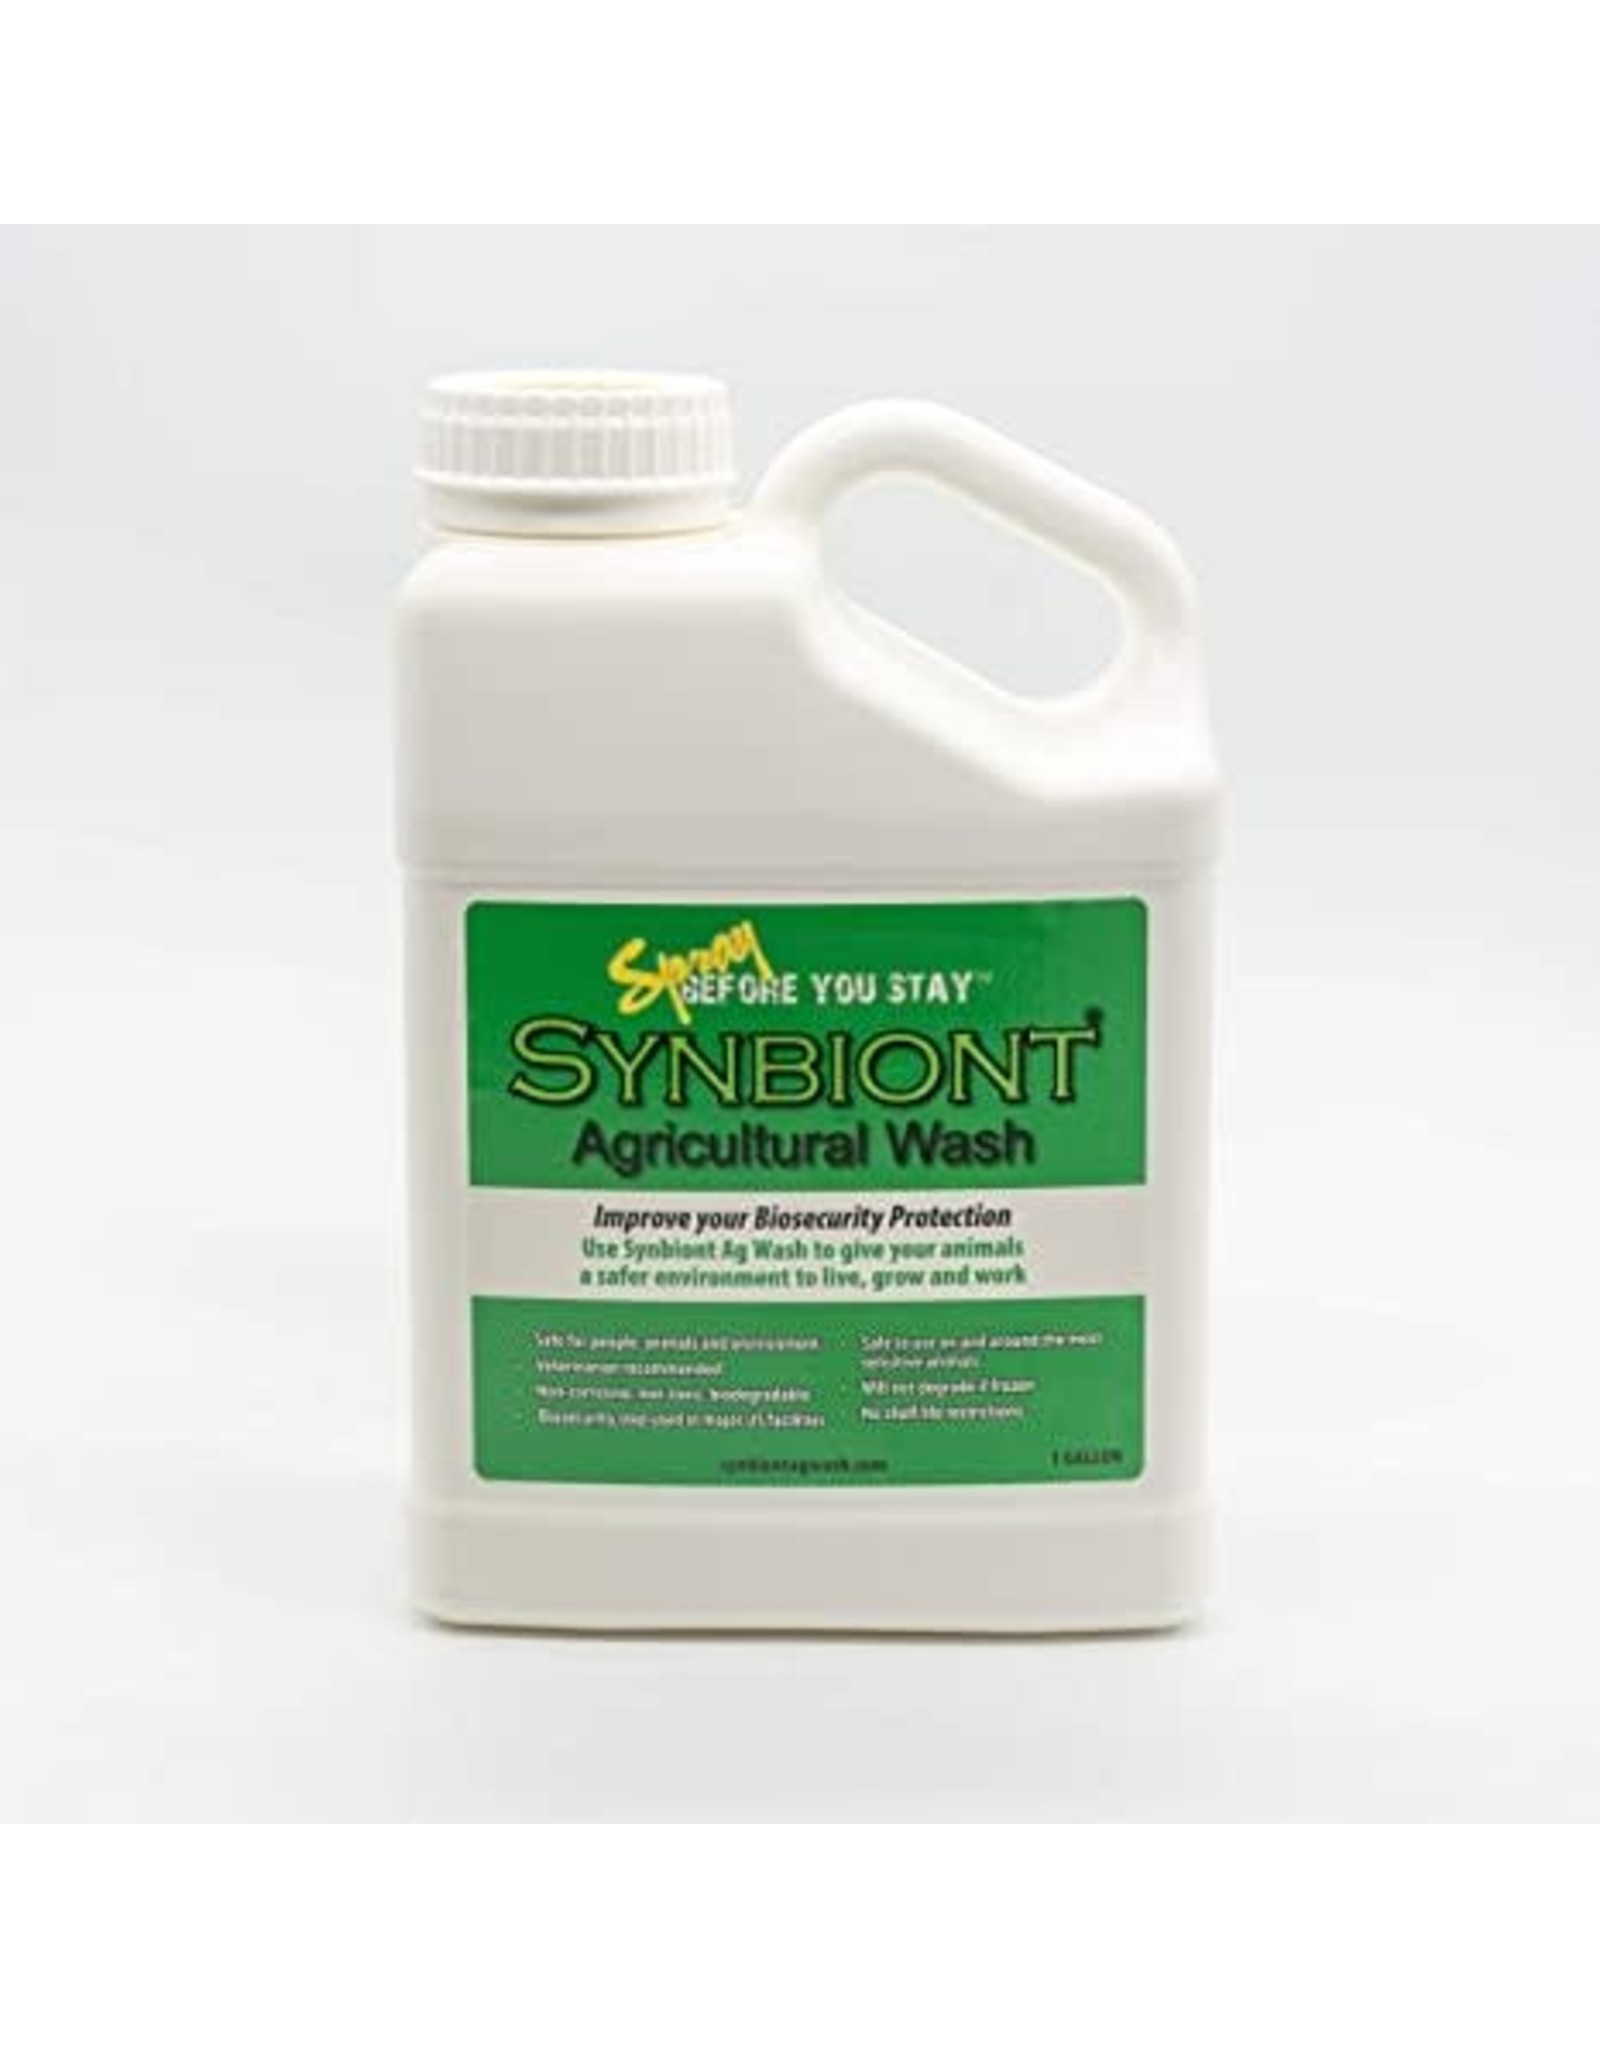 Synbiont - Agricultural Wash - 1 GAL